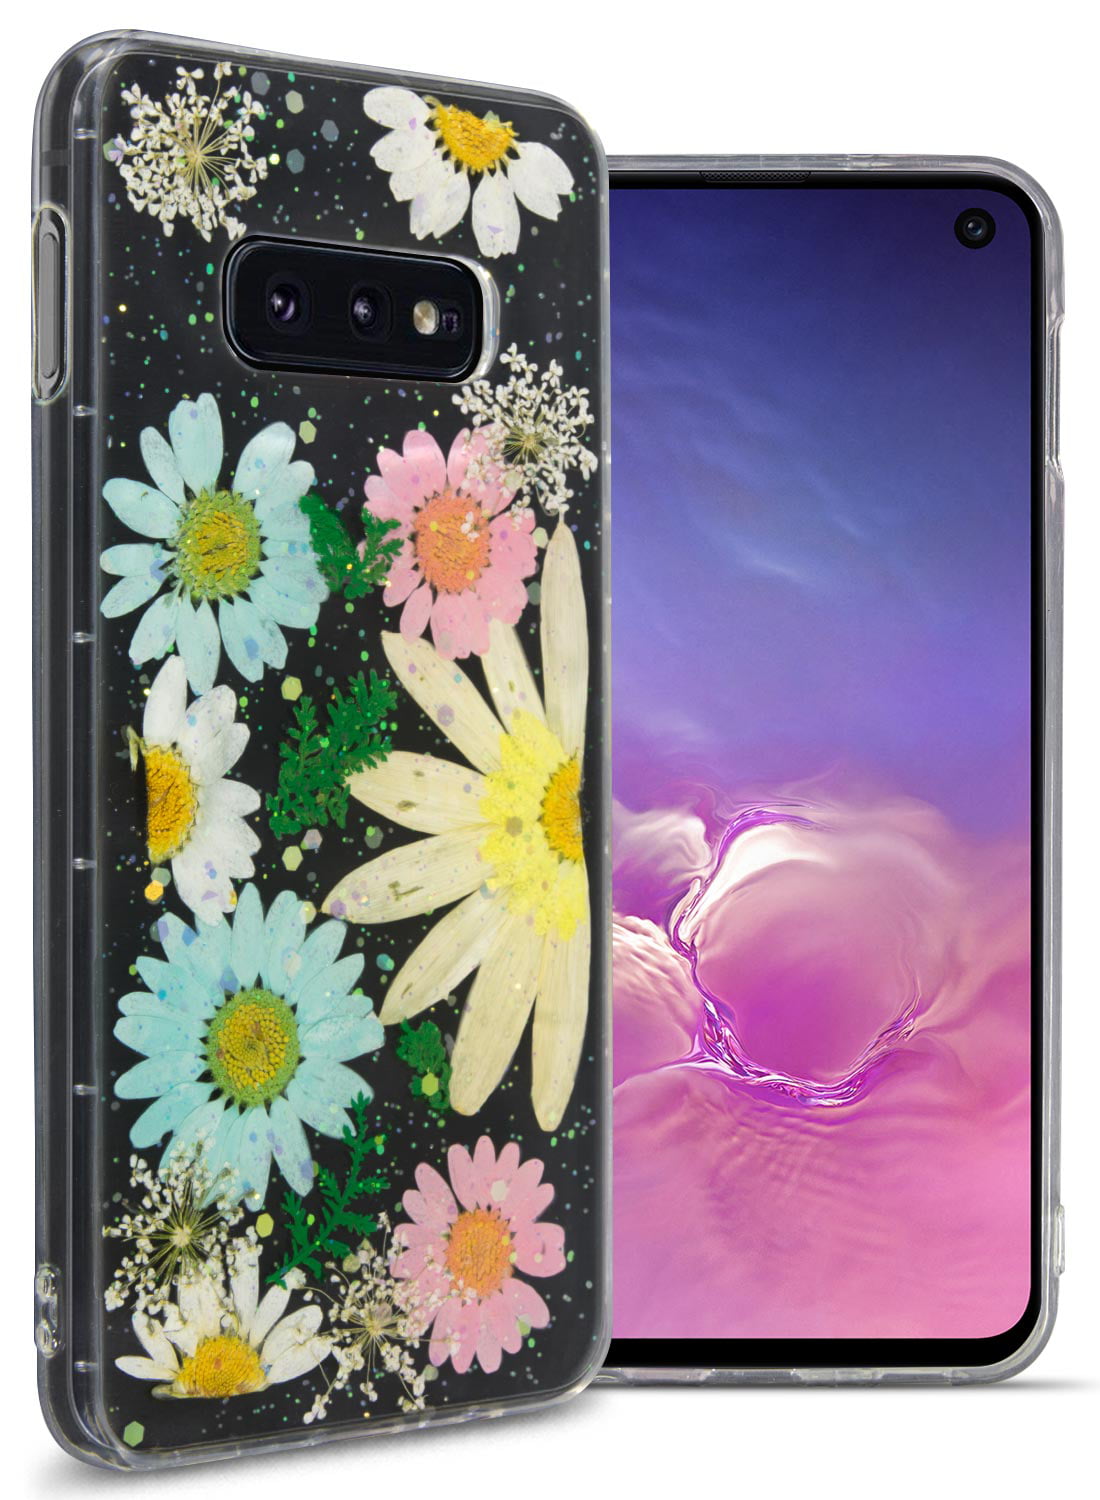 CoverON Samsung Galaxy S10E Case with Real Flowers Slim Fit TPU Phone